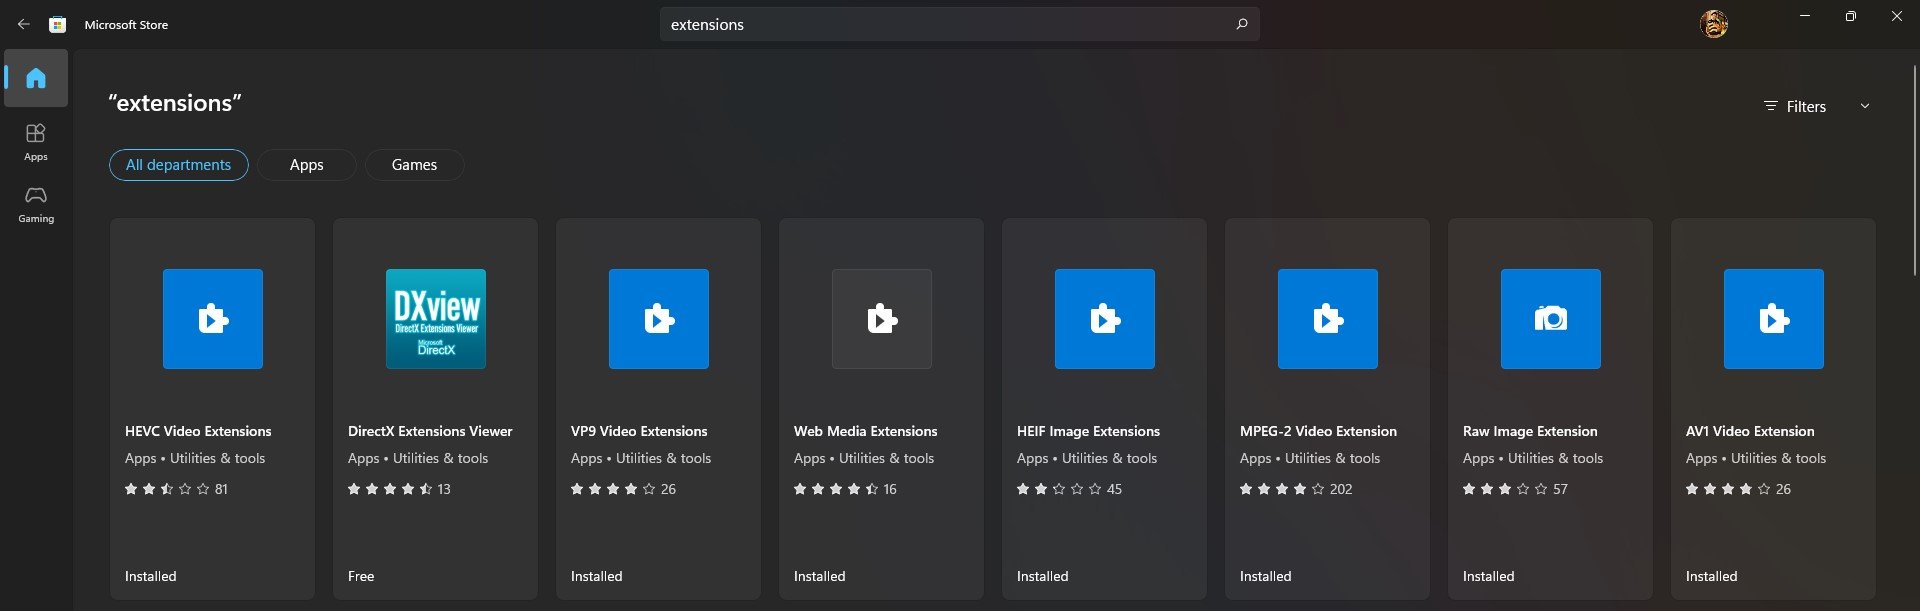 microsoft store showing extensions available for download